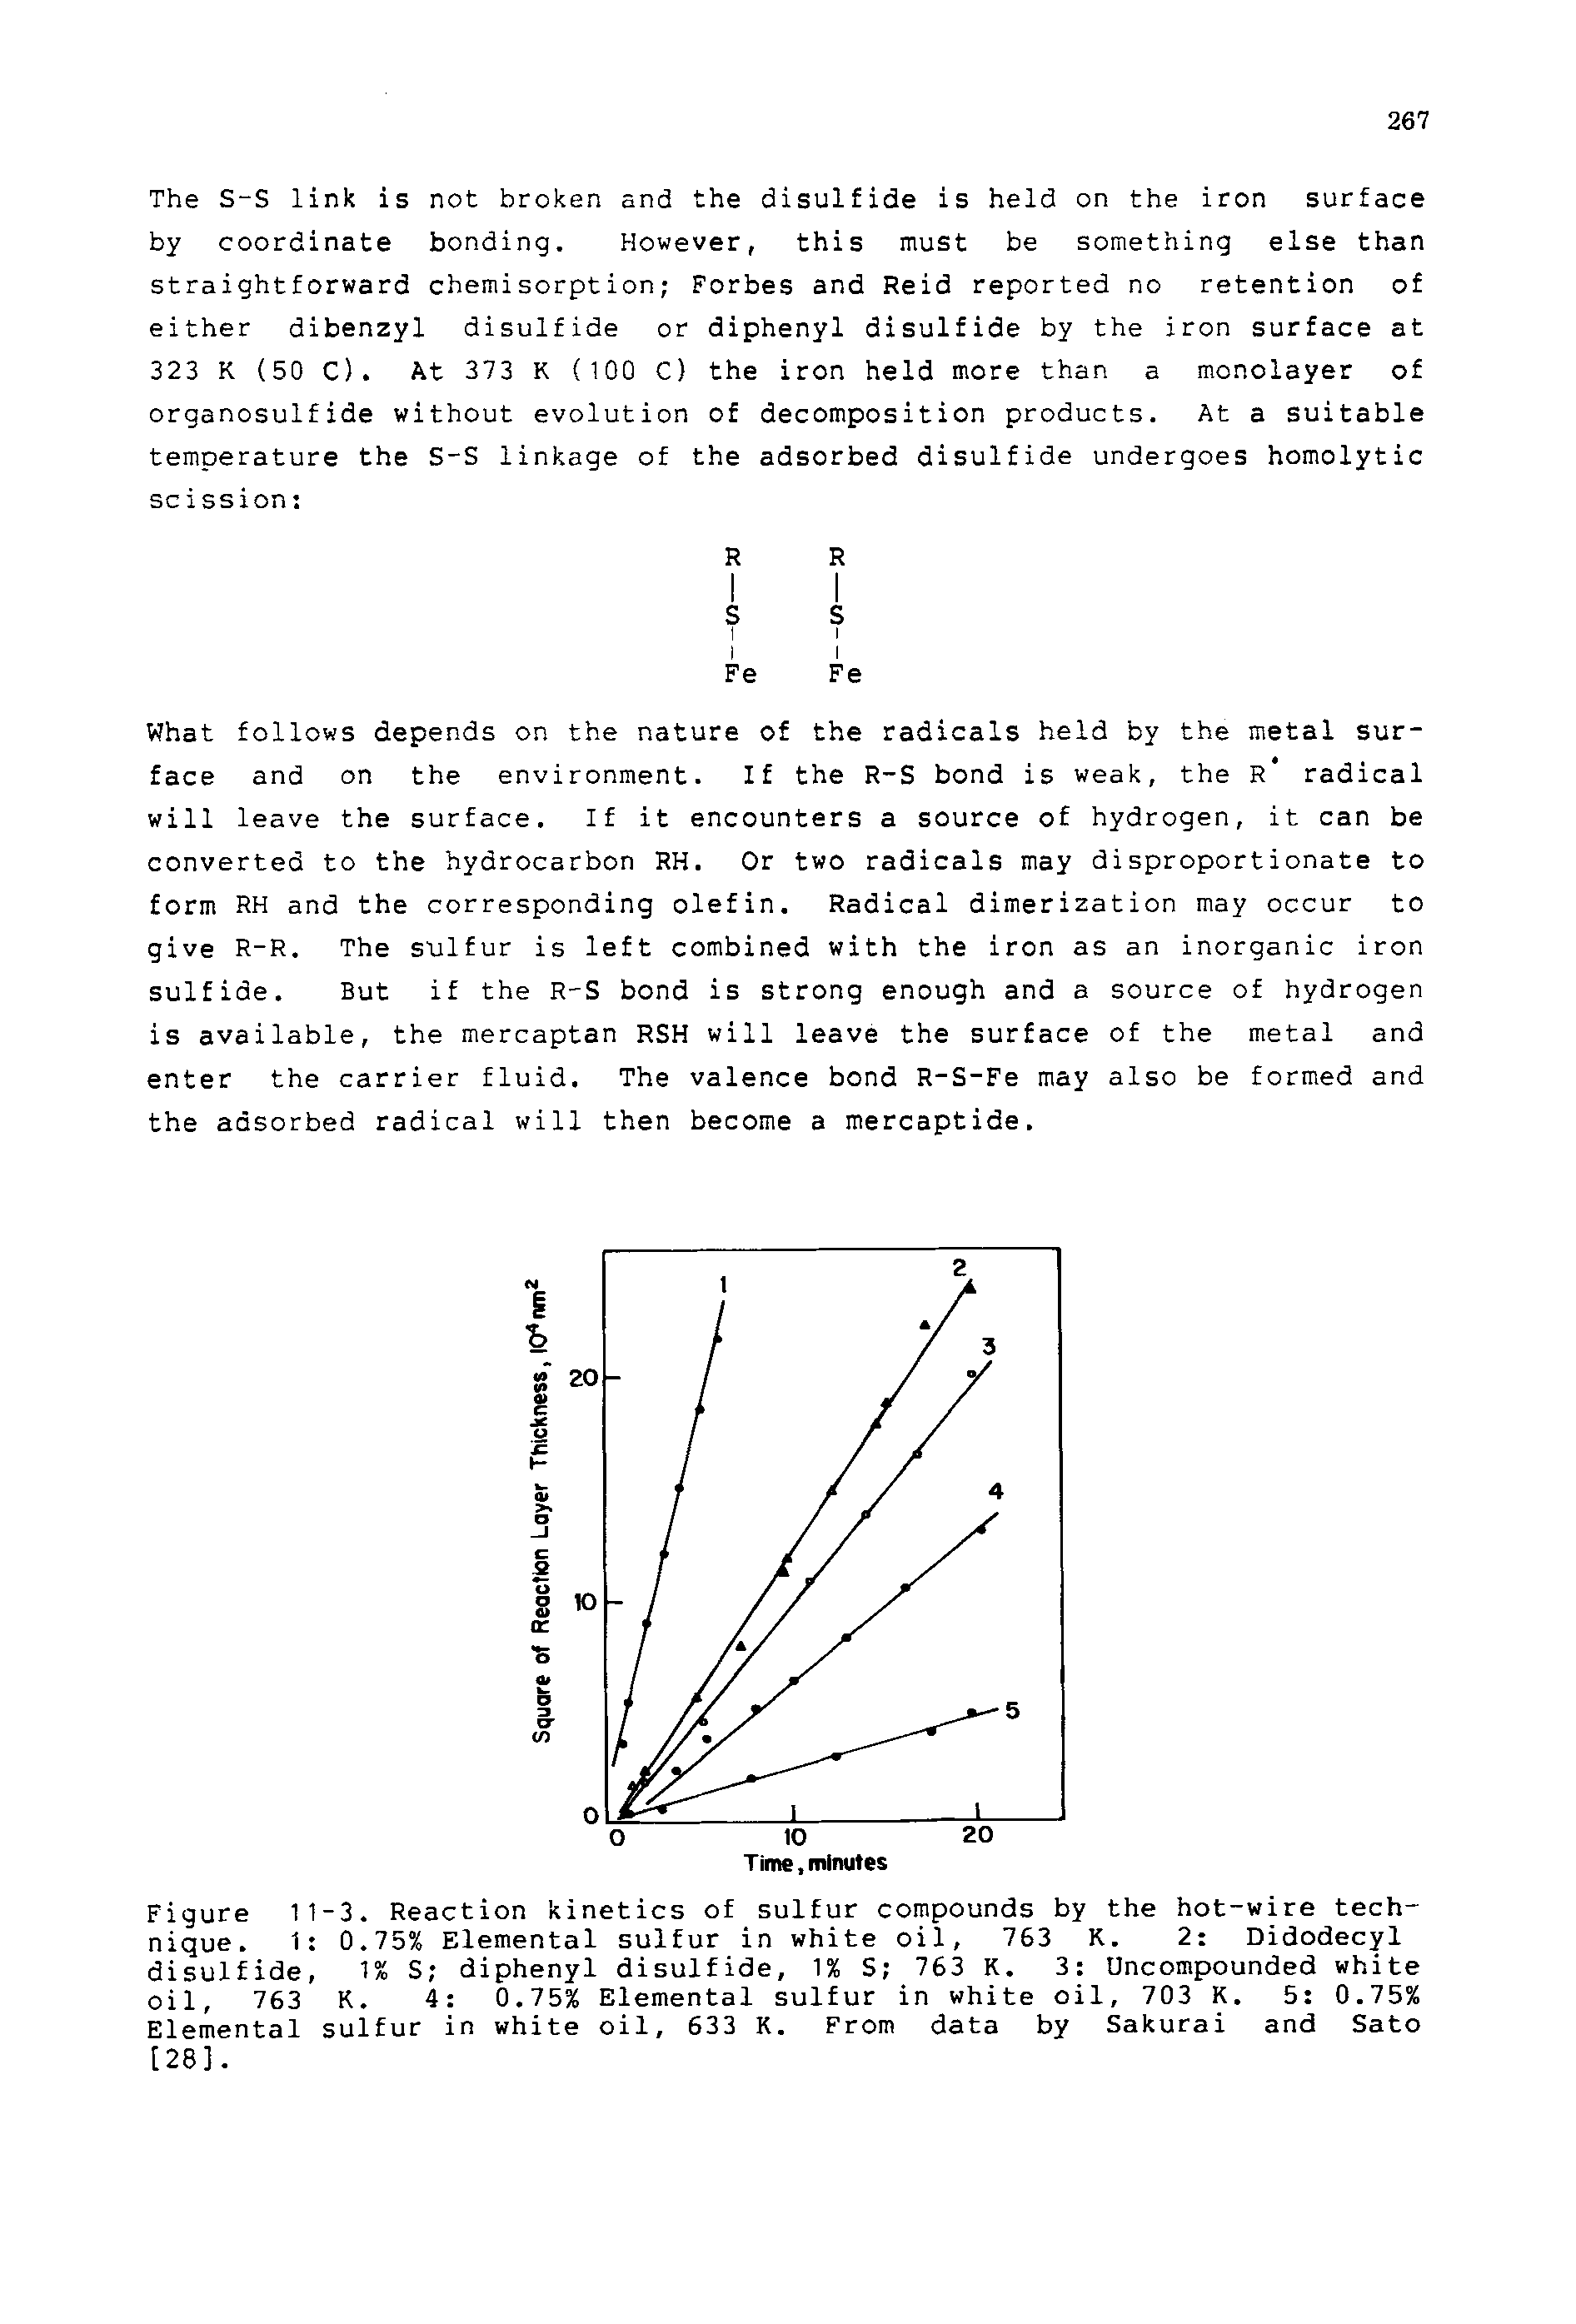 Figure 11-3. Reaction kinetics of sulfur compounds by the hot-wire technique. 1 0.75% Elemental sulfur in white oil, 763 K. 2 Didodecyl disulfide, 1% S diphenyl disulfide, 1% S 763 K. 3 Uncompounded white oil, 763 K. 4 0.75% Elemental sulfur in white oil, 703 K. 5 0.75%...